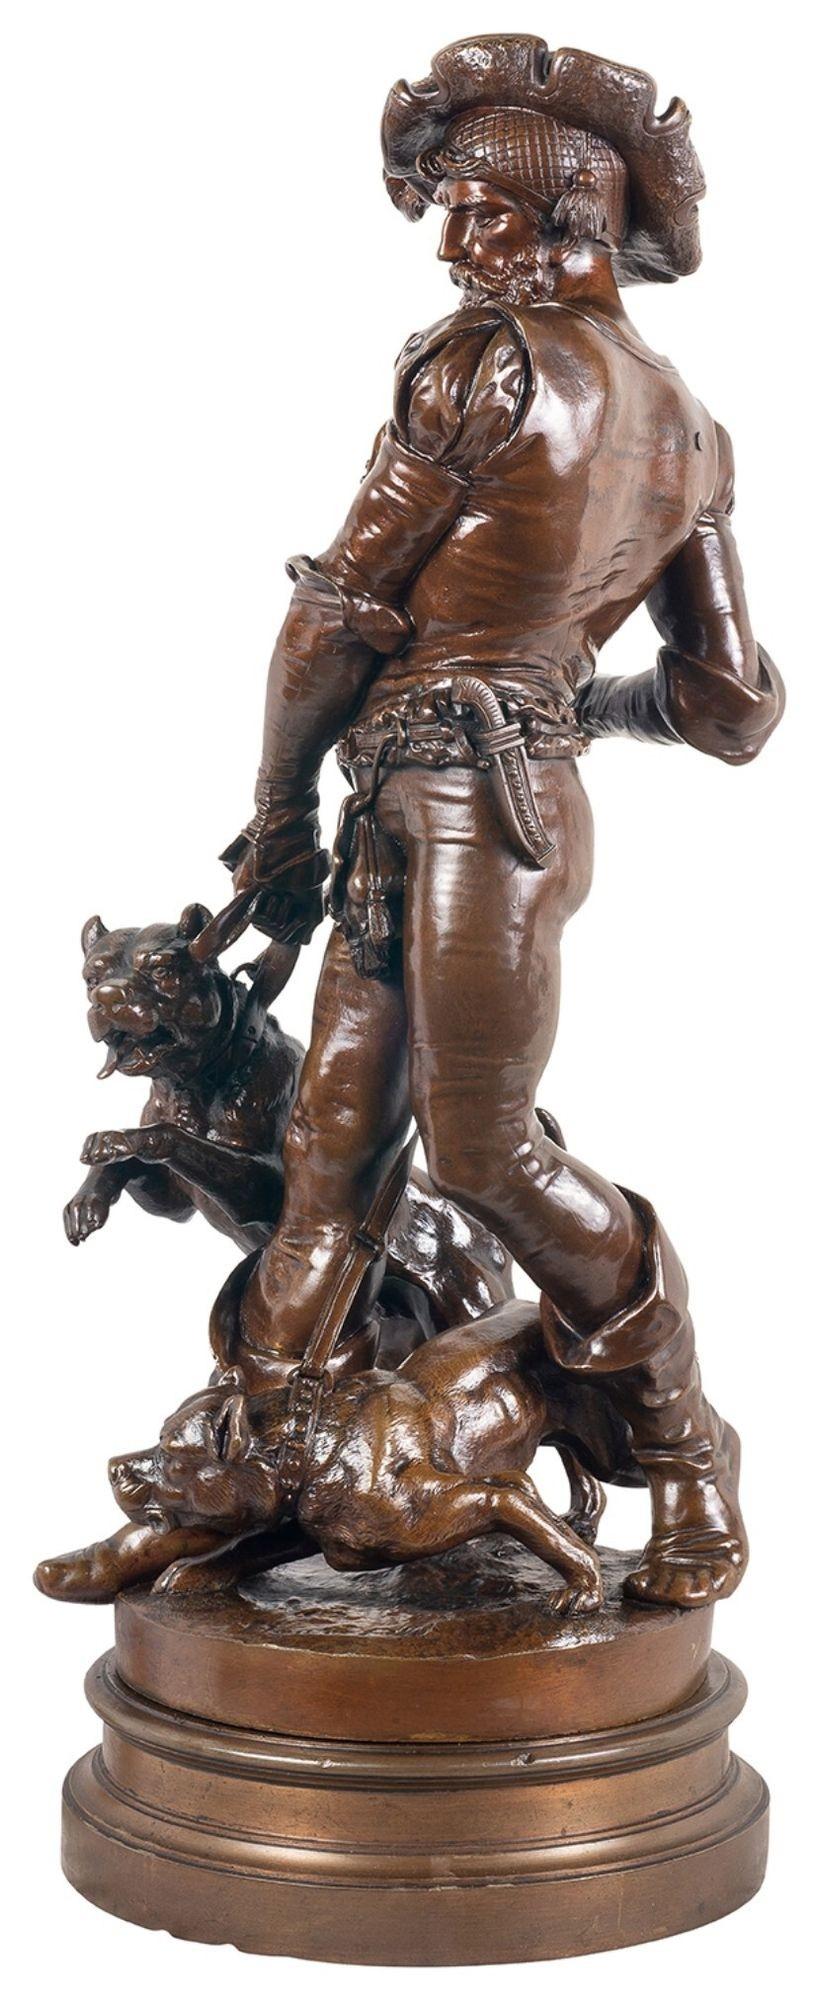 A very dramatic bronze statue, depicting a 19th century Houndsman with his two hounds. Revolves on a bronze socal base. Henri Honoré Plé was born in Paris on March 8, 1853. He died in the same city on January 31, 1922. He was a student of Gerault